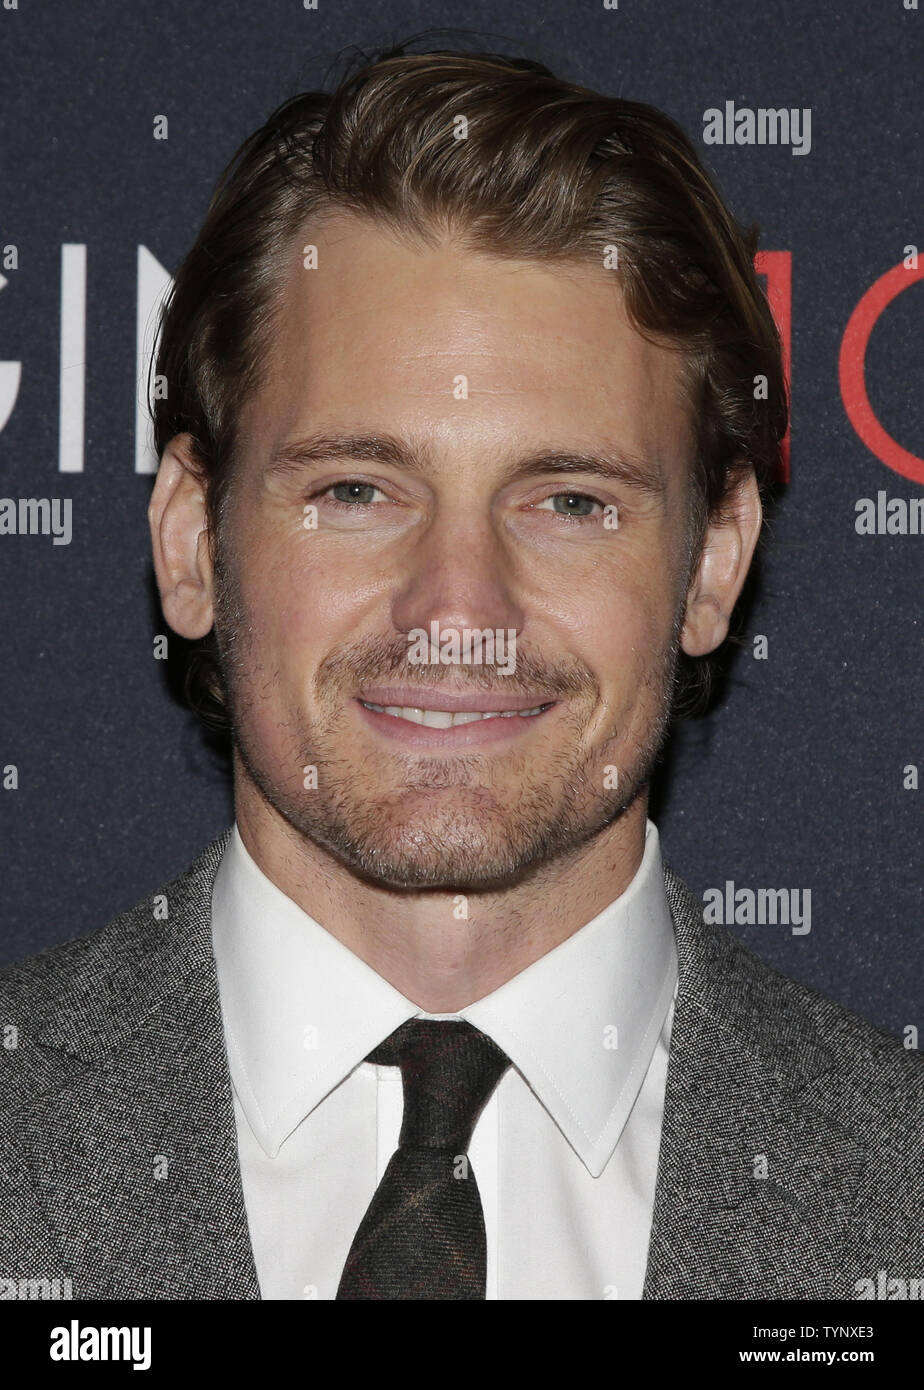 Josh Pence arrives on the red carpet at the premiere of Canon's Project Imaginat10n Film Festival at Alice Tully Hall in New York City on October 24, 2013.       UPI/John Angelillo Stock Photo